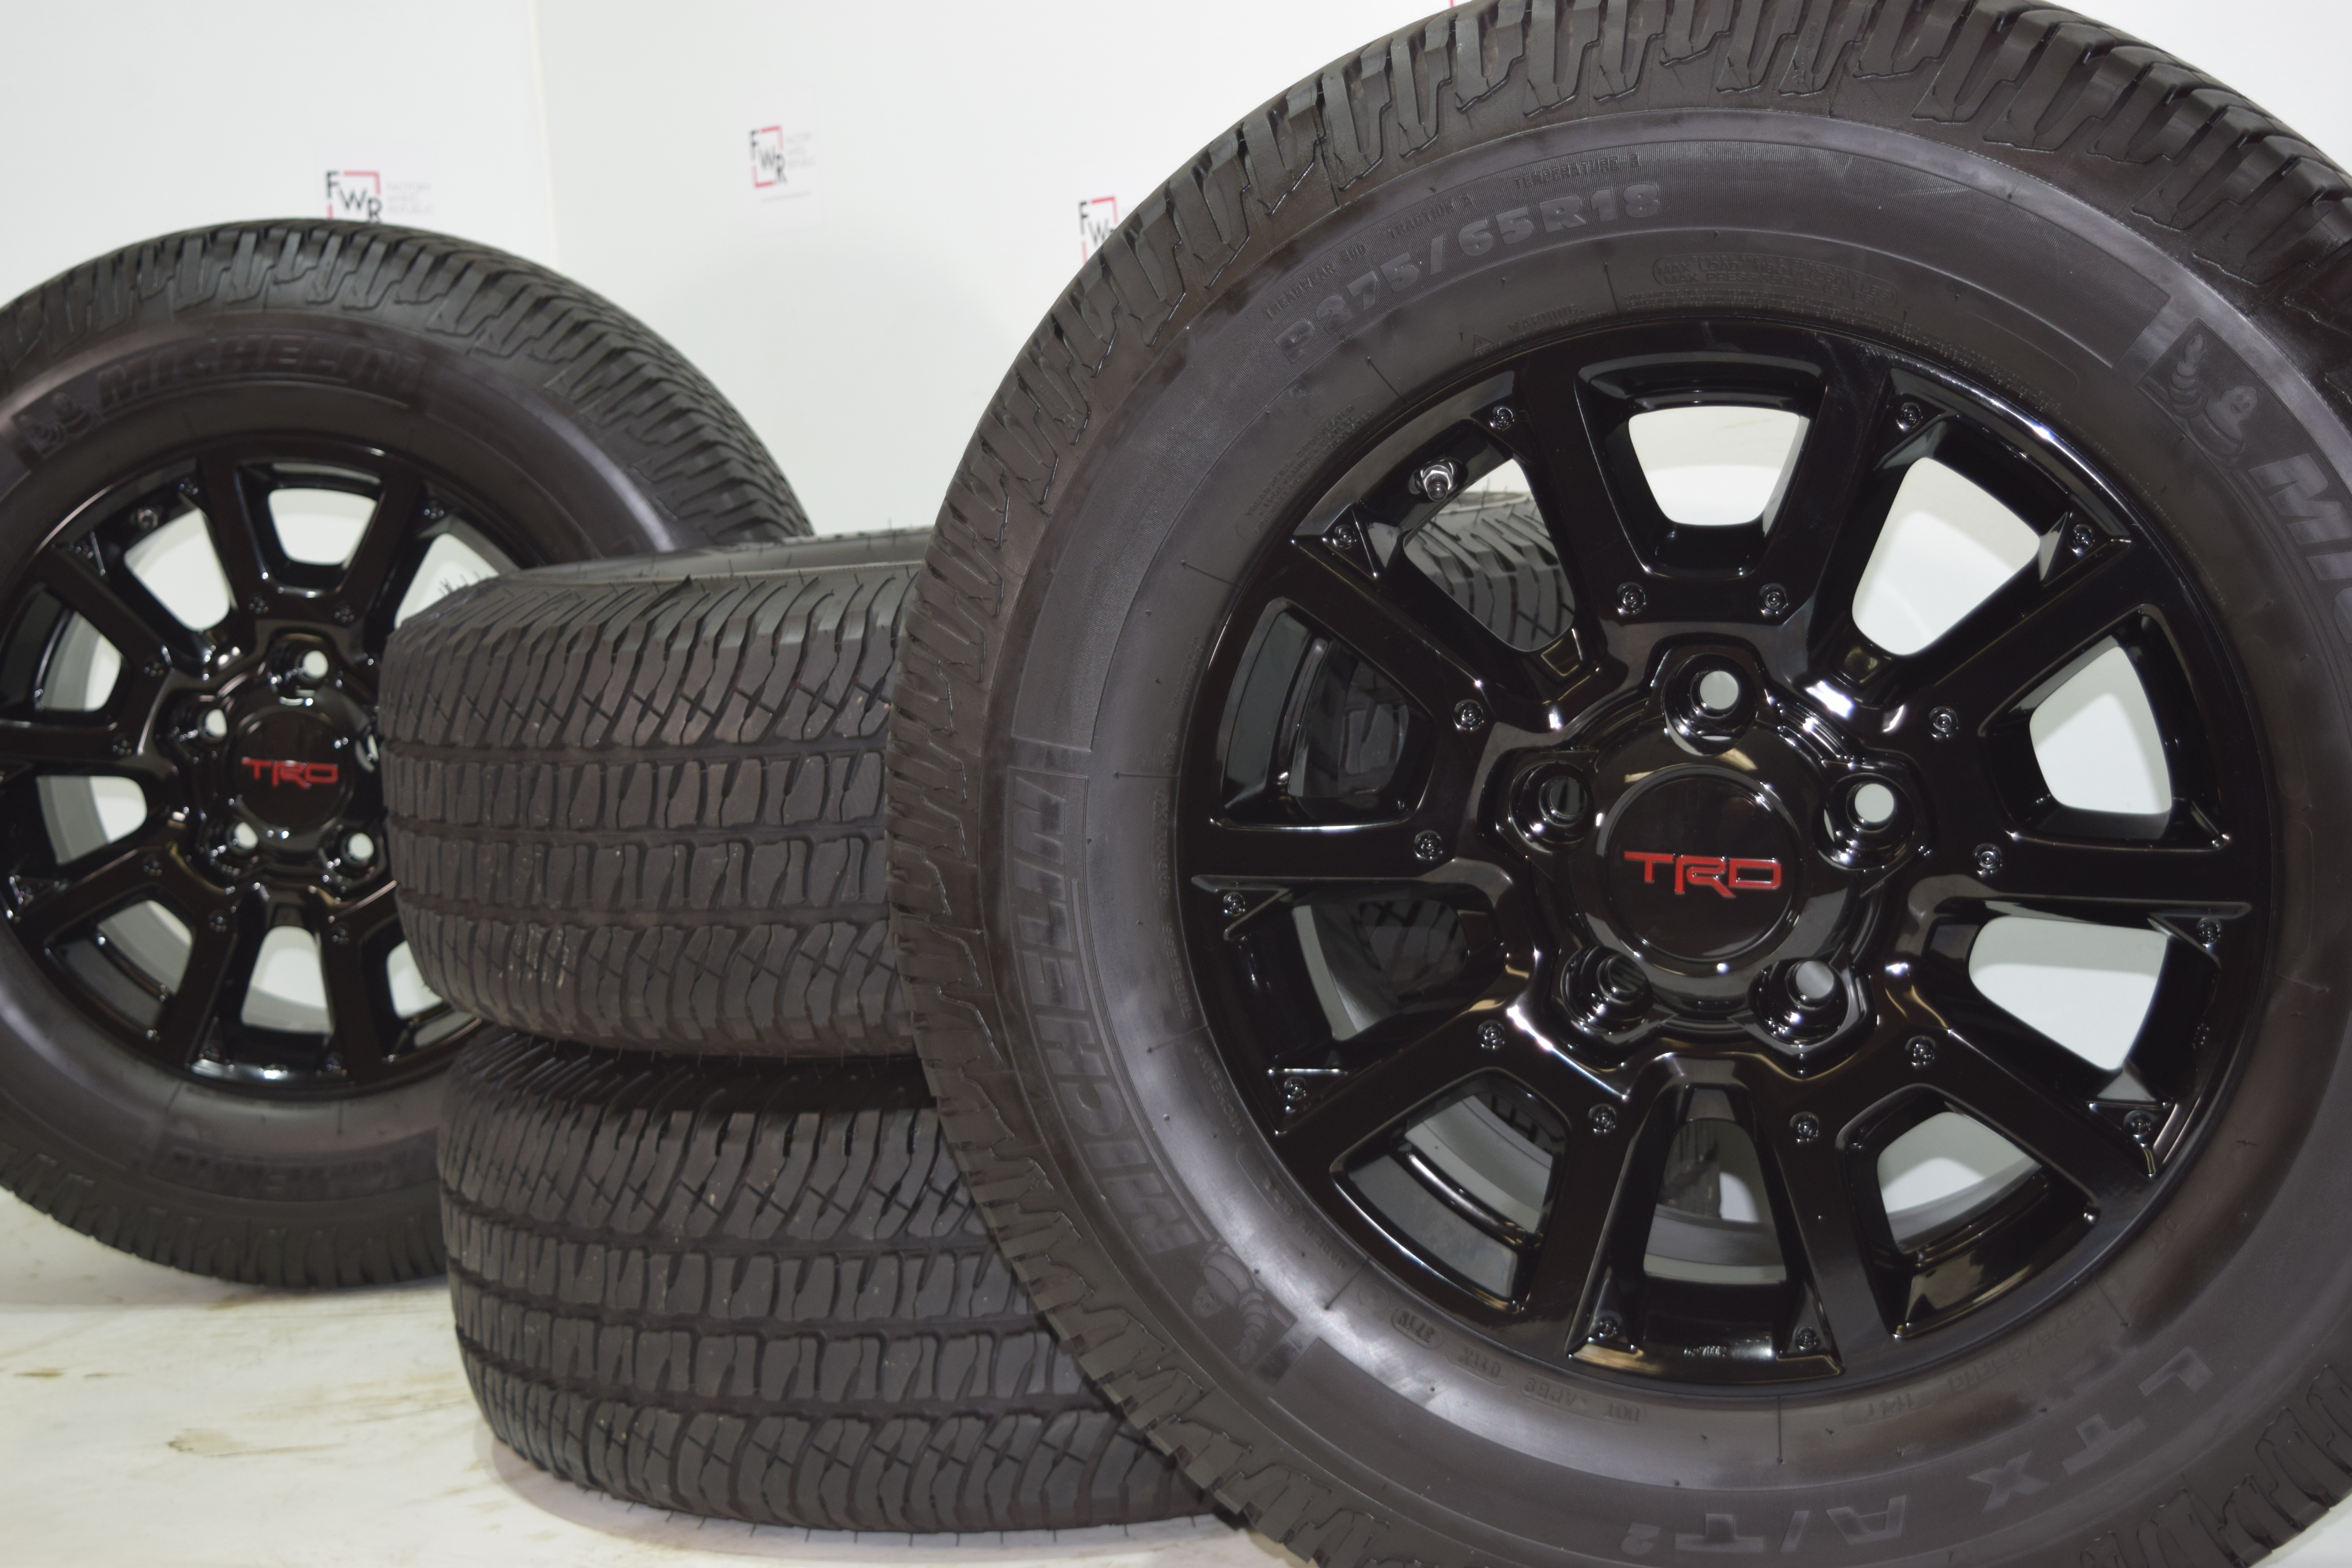 Toyota Tundra Trd Pro Wheels | All in one Photos